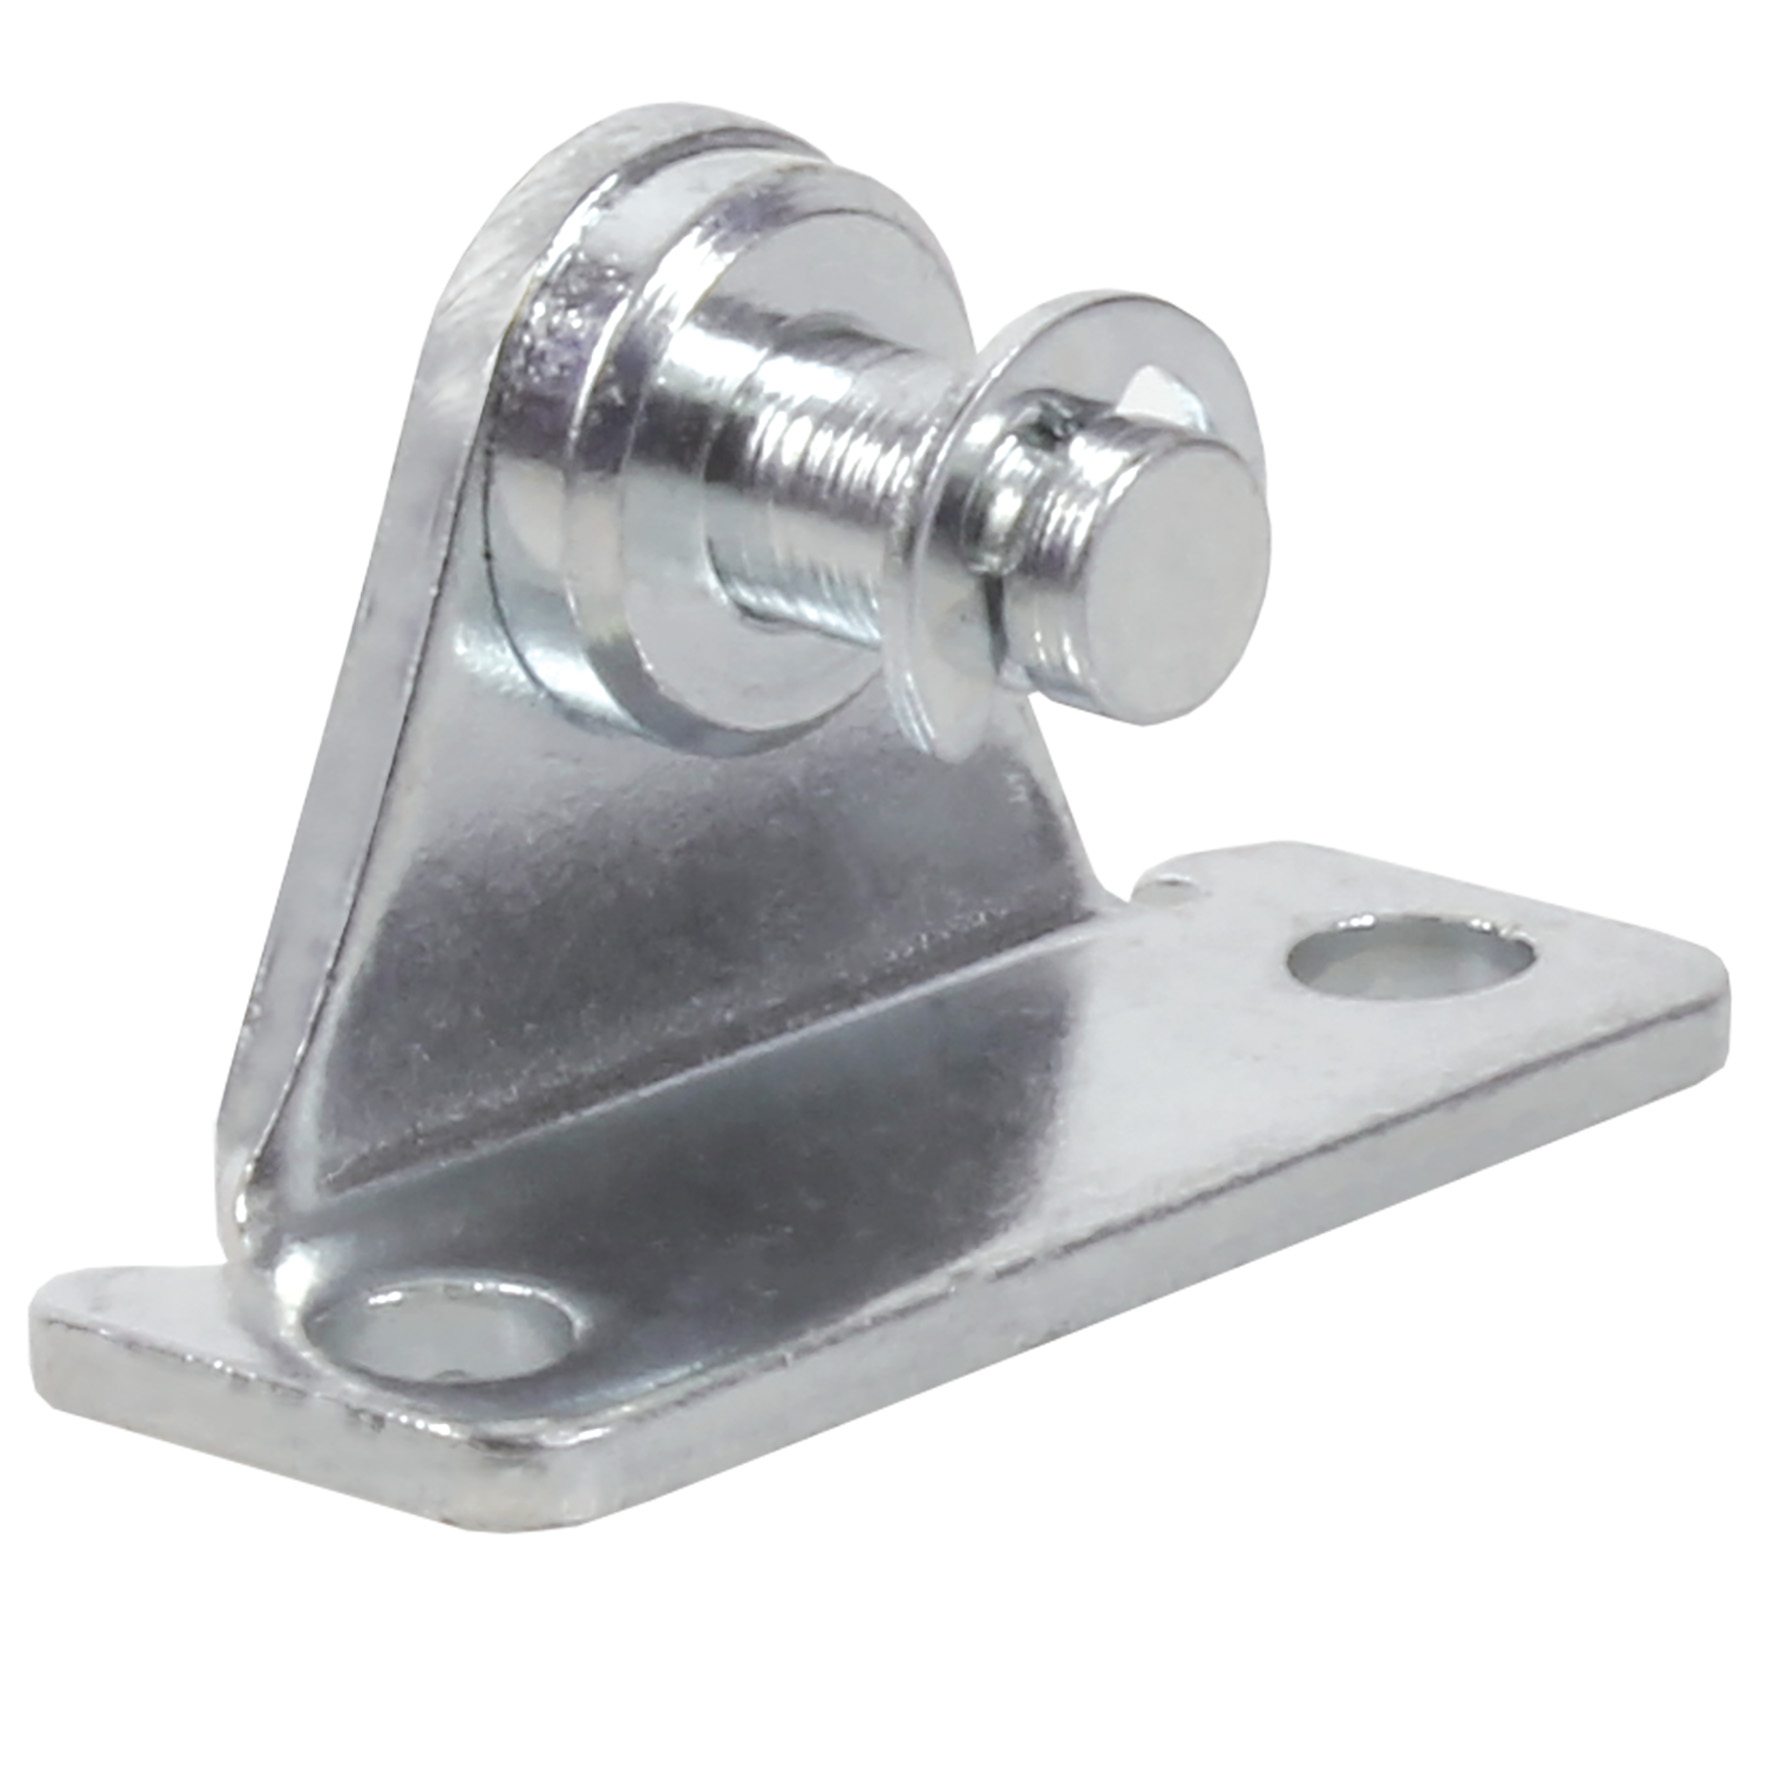 Right angled mounting plate - Right angled mounting plate for clevis - Stainless steel - 